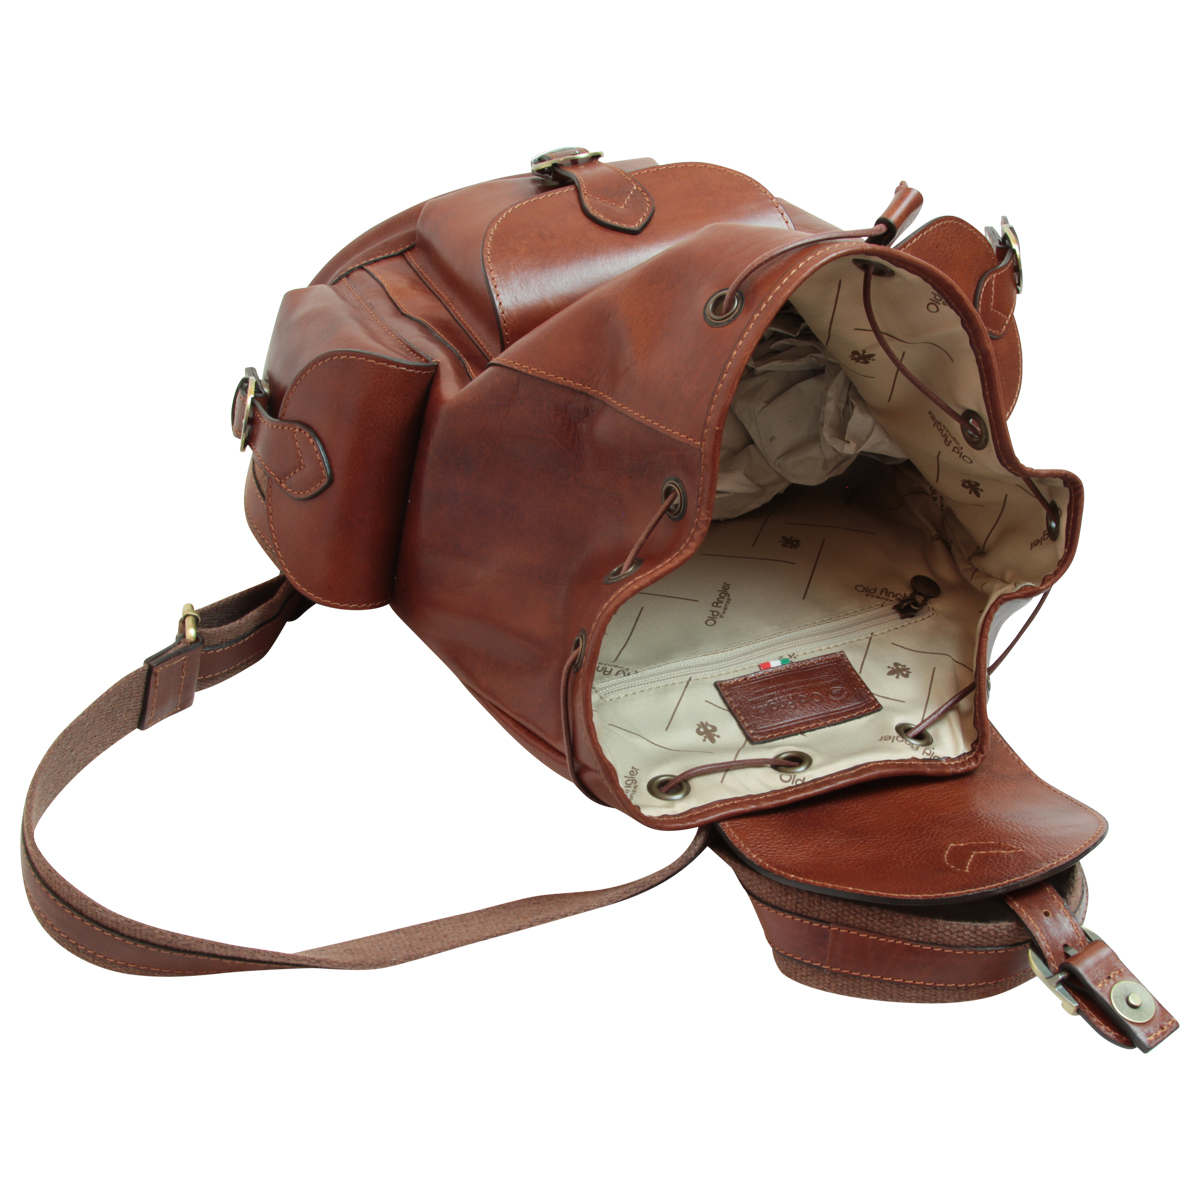 Leather backpack with 3 exterior pockets - Brown | 109105MA | EURO | Old Angler Firenze